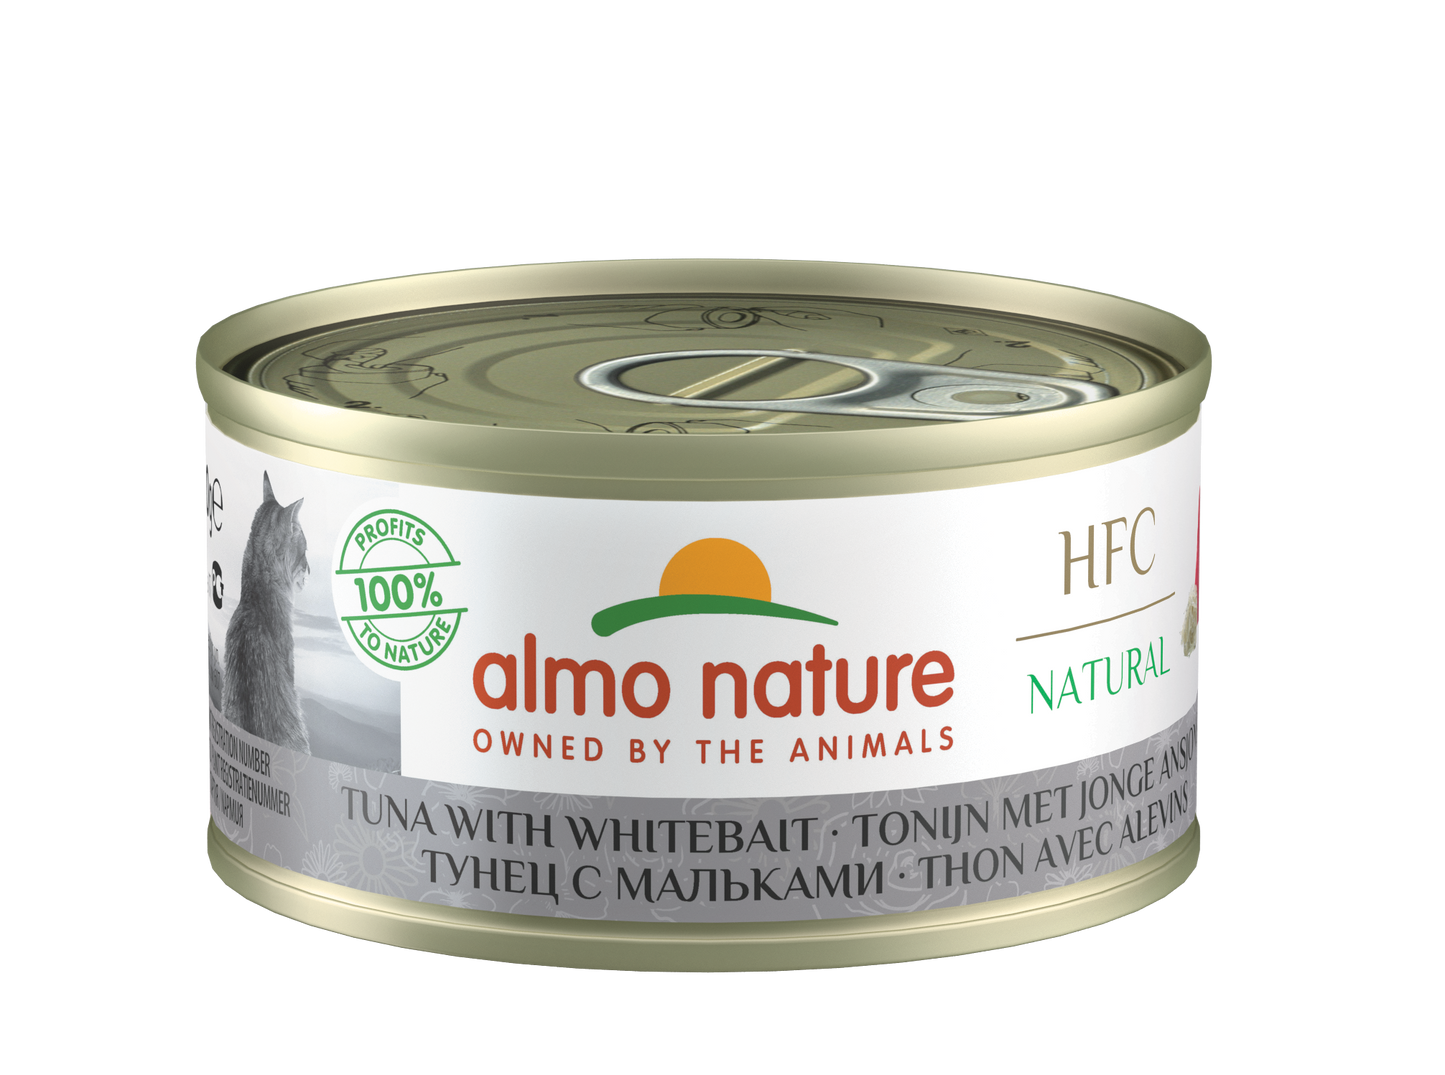 Almo Nature HFC Natural Canned Cat Food – Tuna with Whitebait, 70g